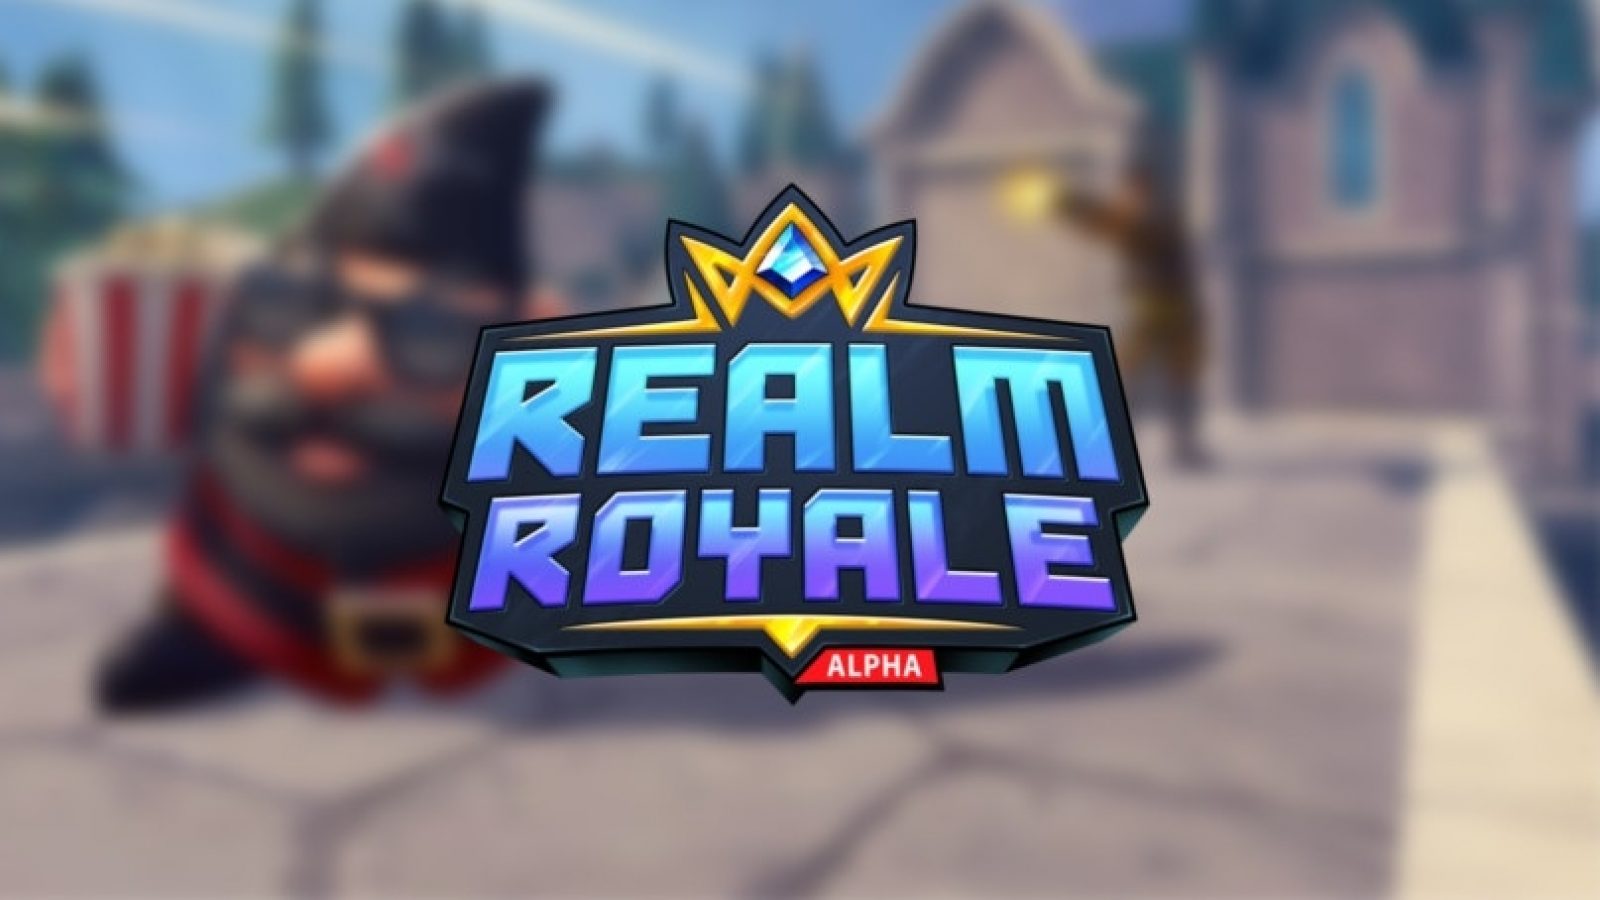 KEEMSTAR Based Skin Has Been Added in Realm Royale -